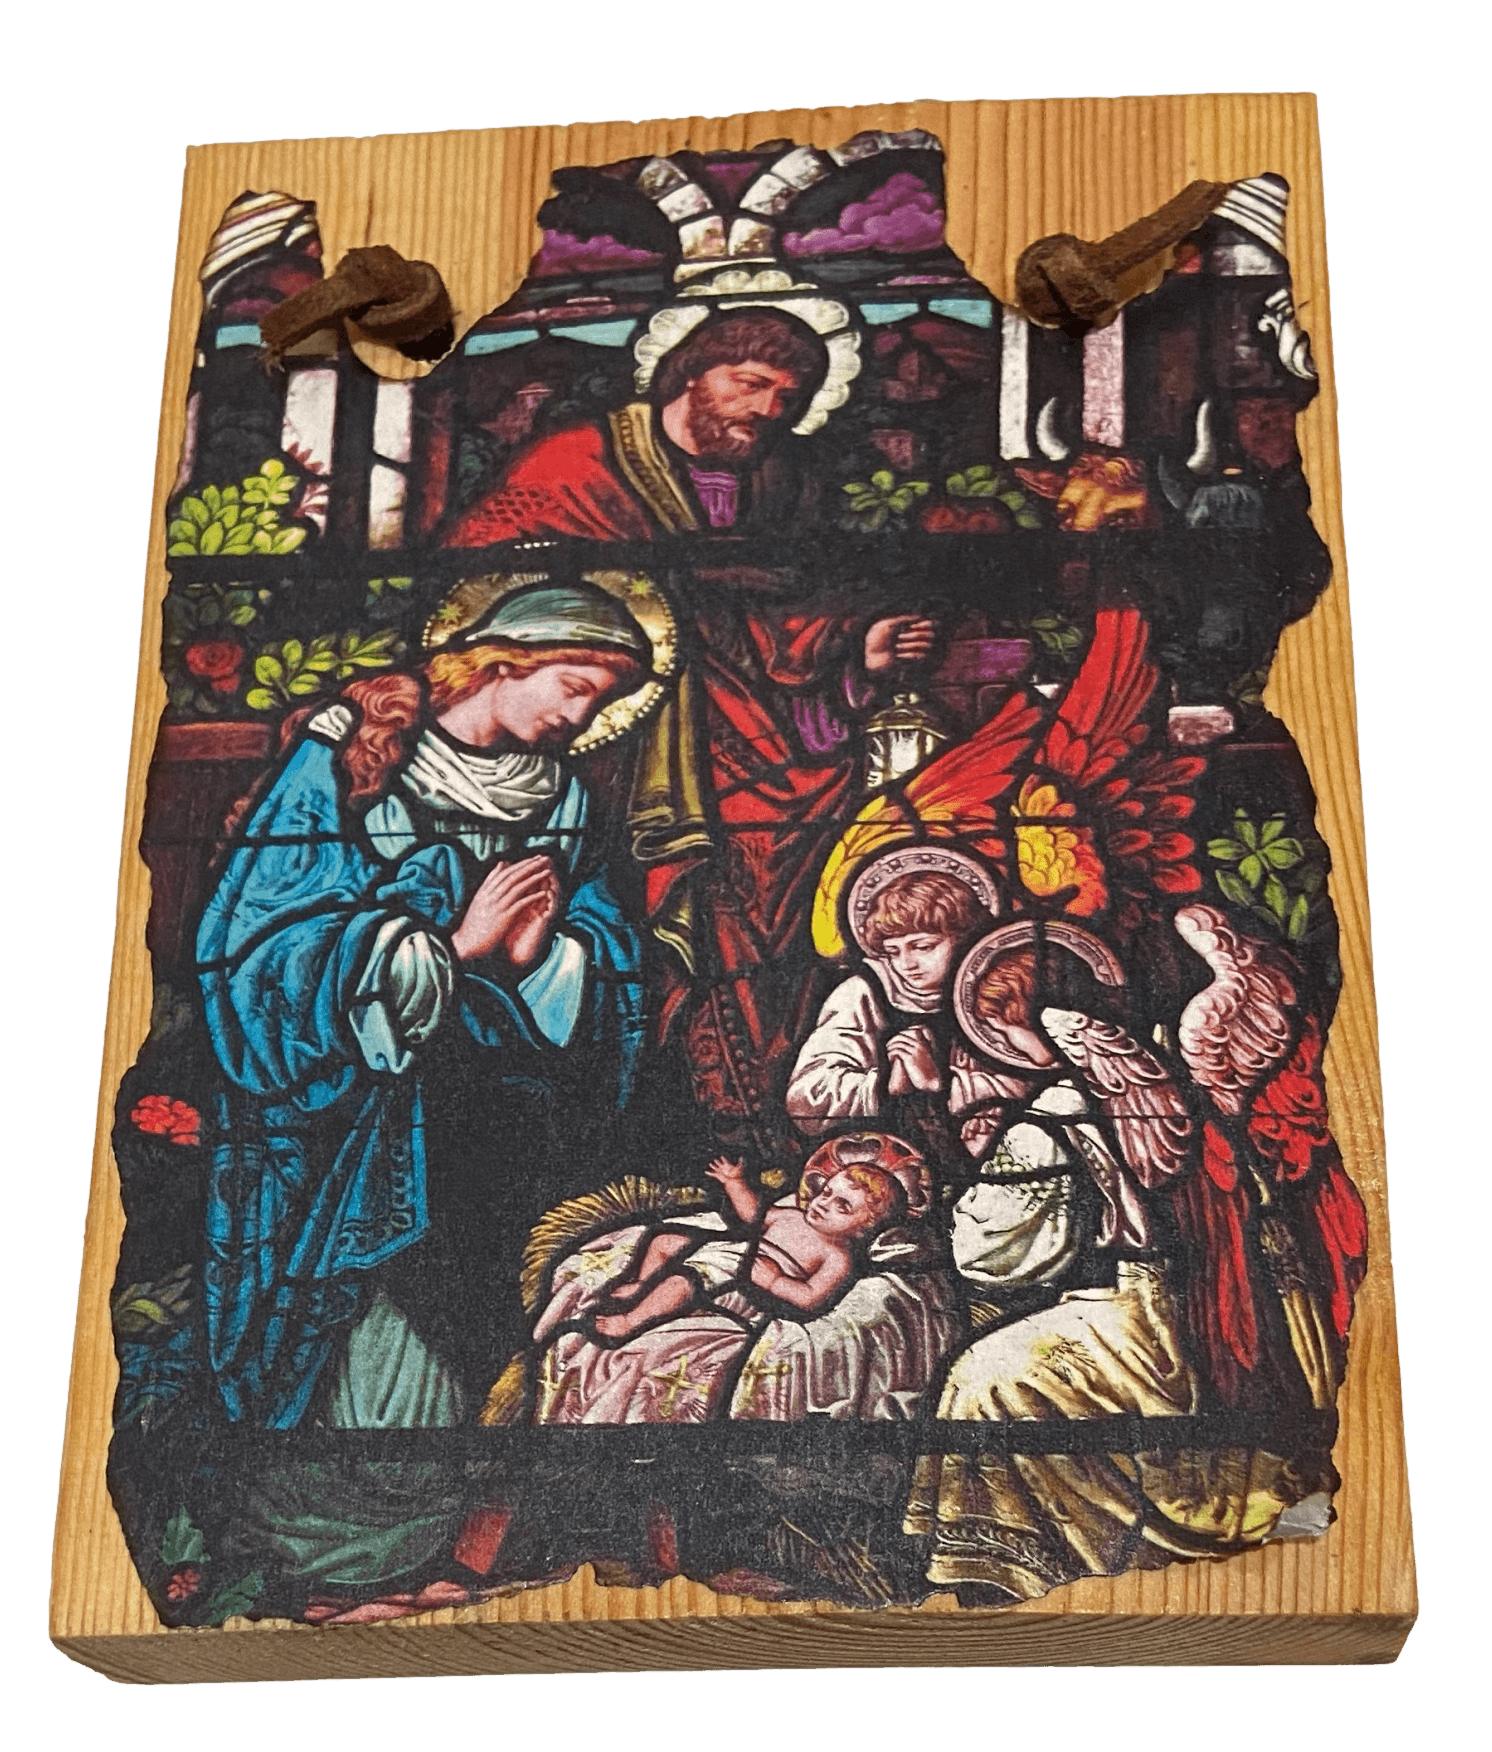 Retablo Wood Holy Family Angel From Morada In Northern Taos County New Mexico By Artist D. Kelsey 6" L x 4.5" W - Ysleta Mission Gift Shop- VOTED El Paso's Best Gift Shop